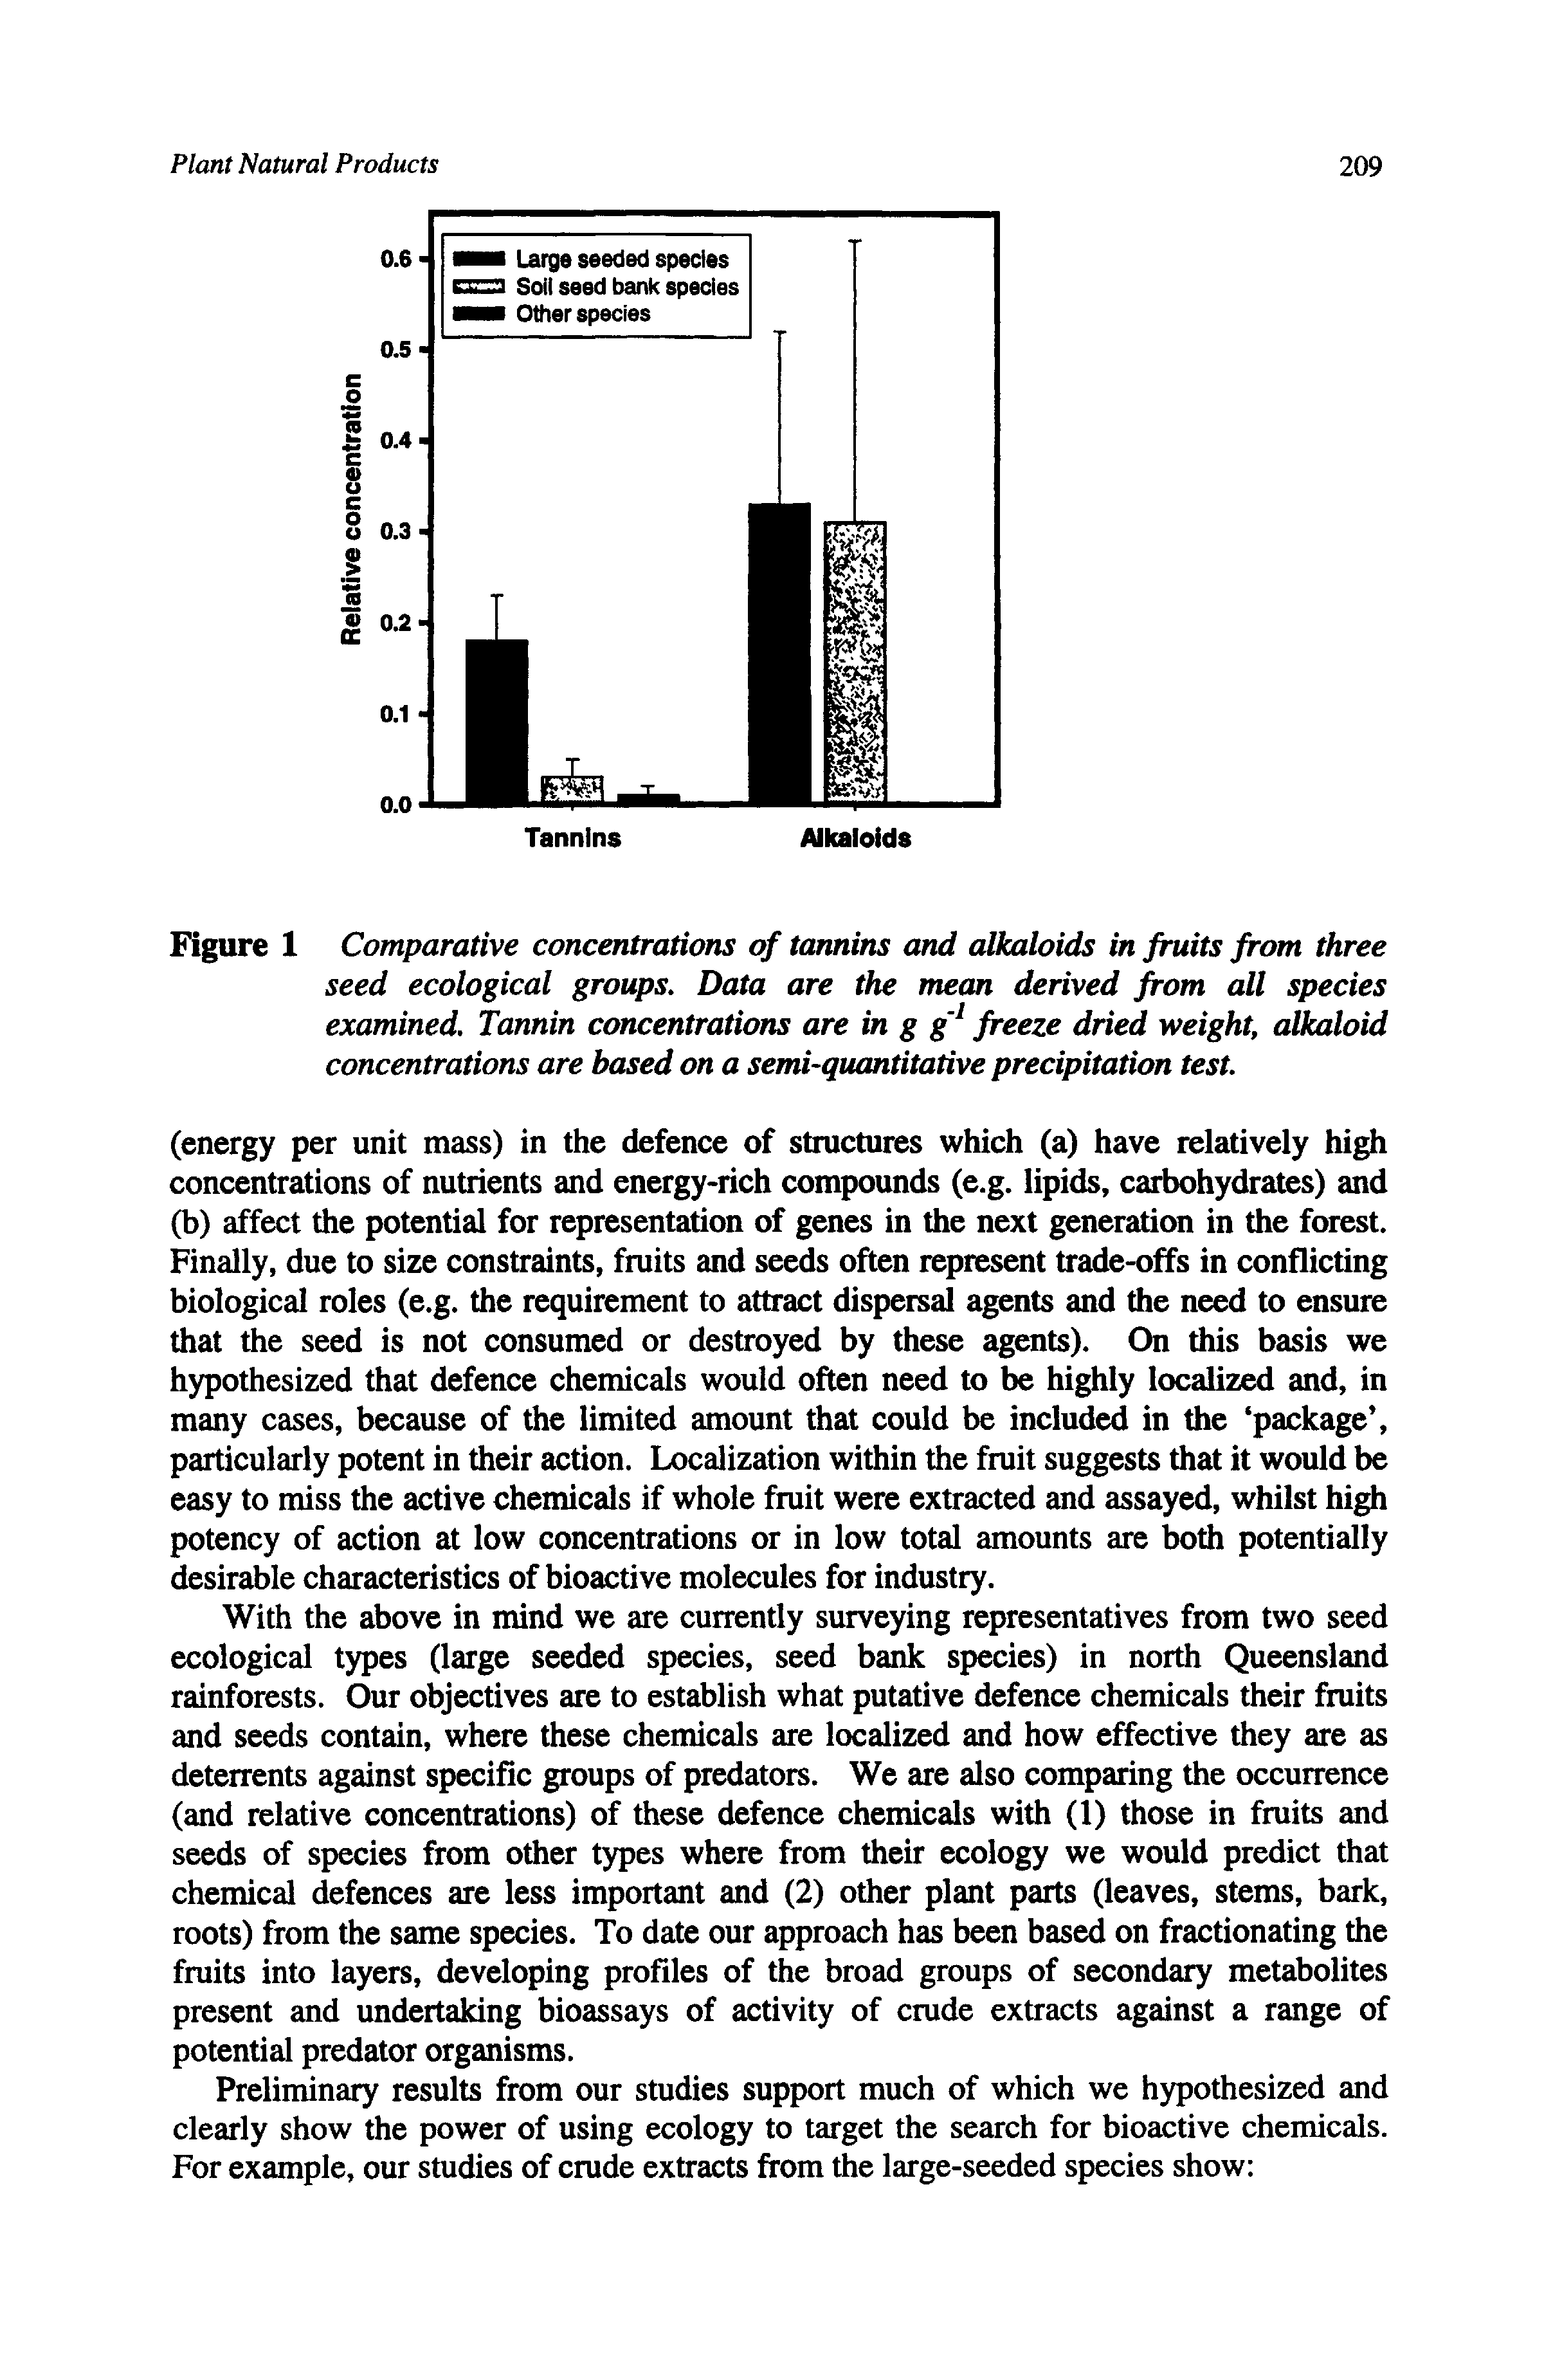 Figure 1 Comparative concentrations of tannins and alkaloids in fruits from three seed ecological groups. Data are the mean derived from all species examined. Tannin concentrations are in g g freeze dried weight, alkaloid concentrations are based on a semi-quantitative precipitation test.